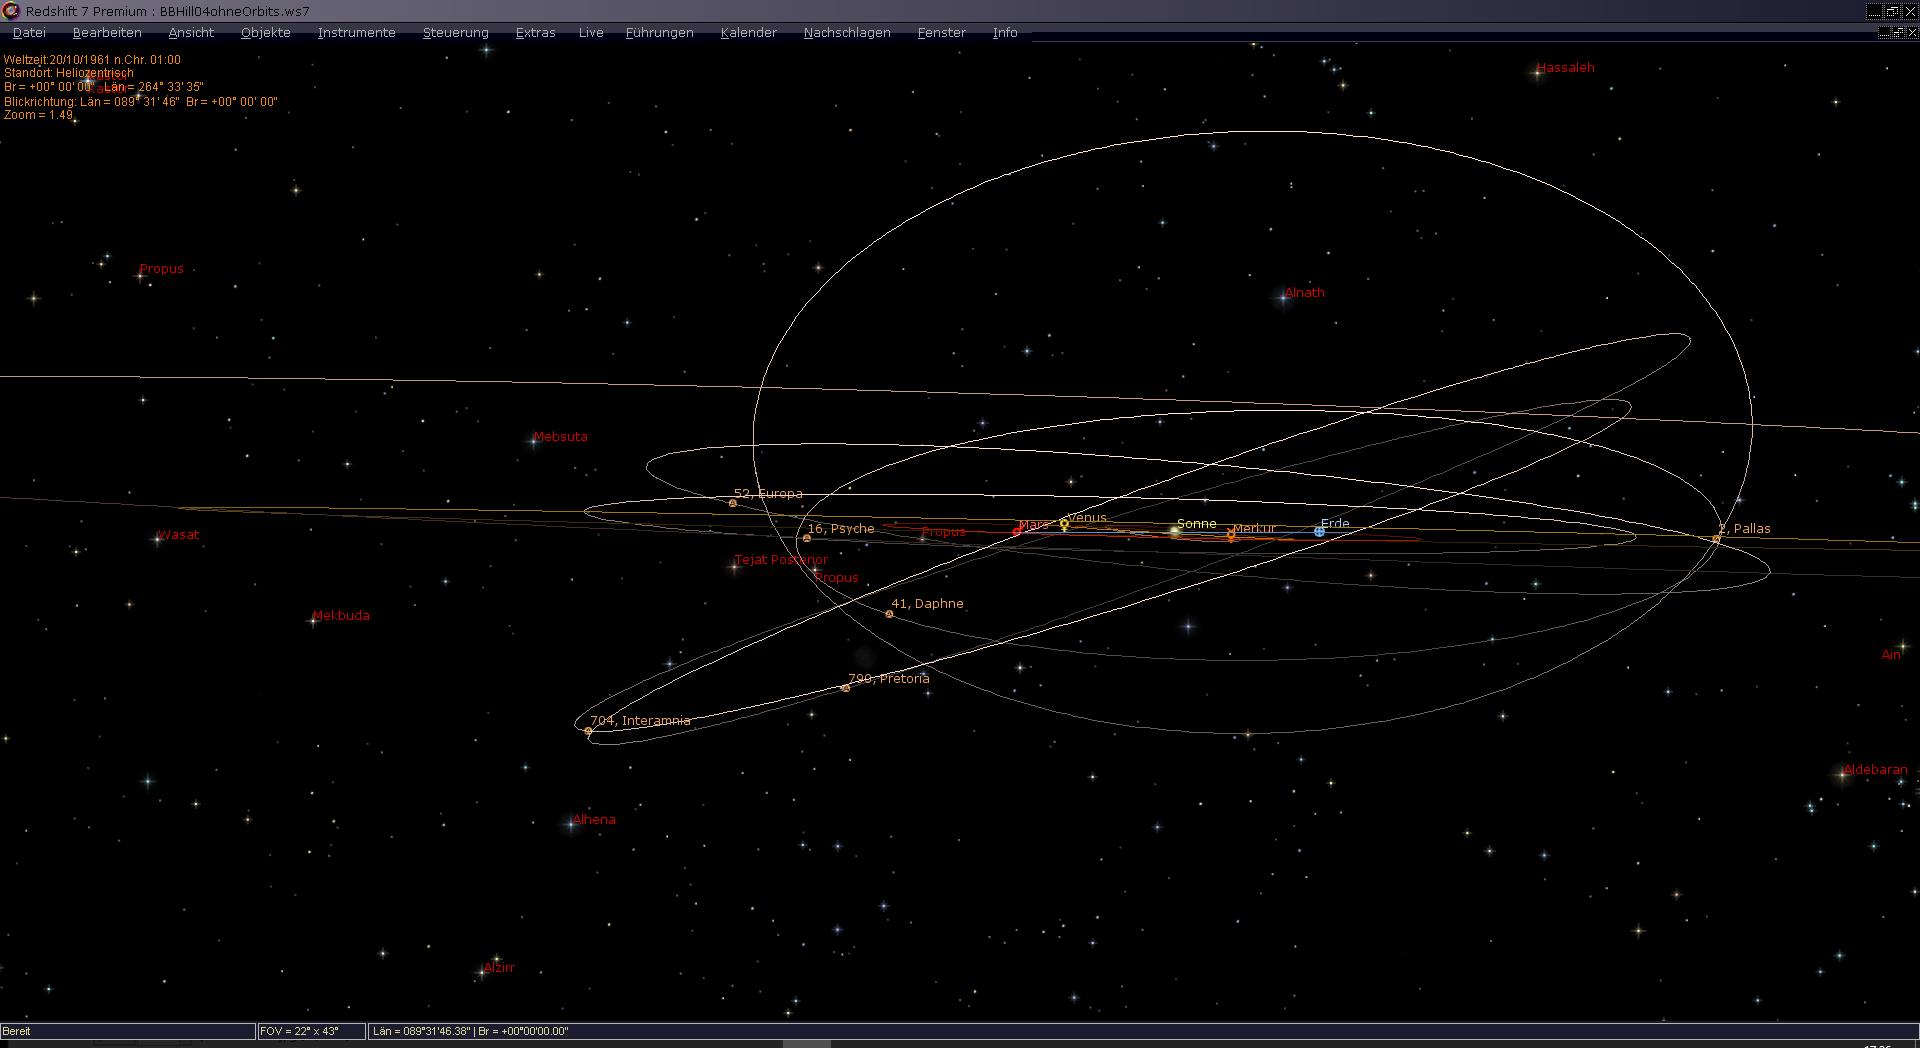 The central part of our Solar System with planetary and asteroid orbits, now seen edge on